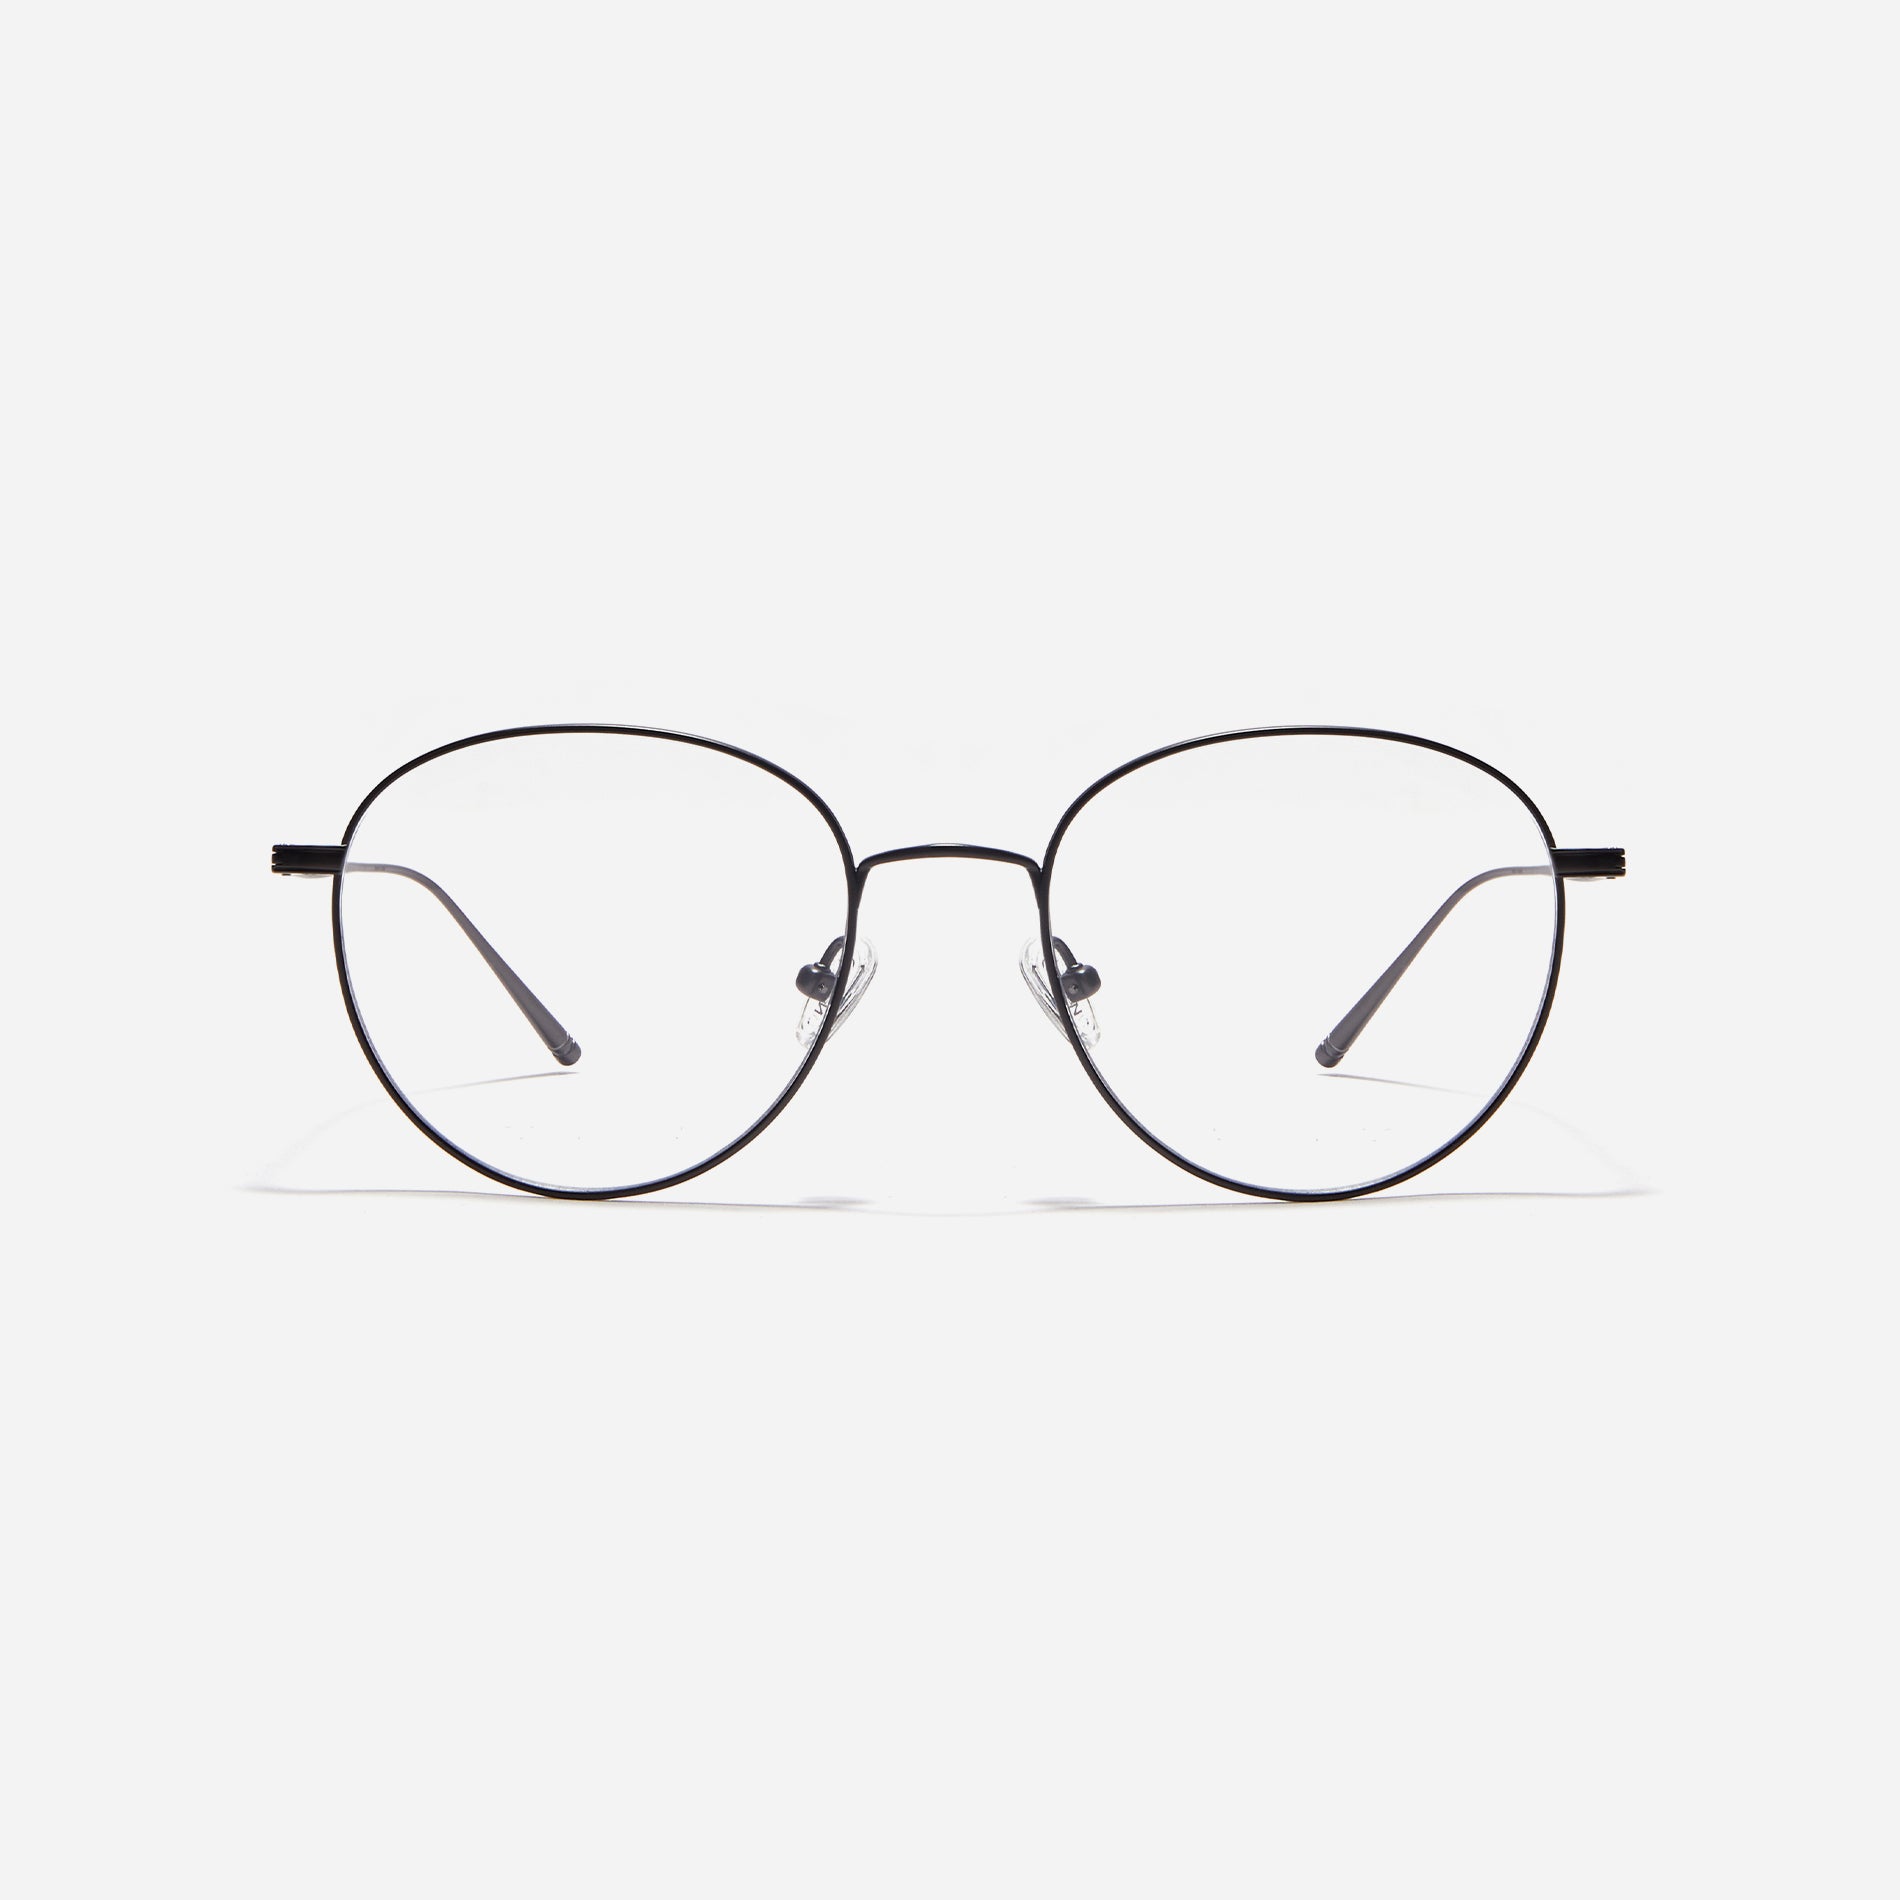 Boston-style round-shaped eyeglasses that naturally enhance one's facial features. Crafted entirely from titanium, they guarantee a lighter and more comfortable fit, while modern design makes them a perfect choice for those seeking a contemporary look.